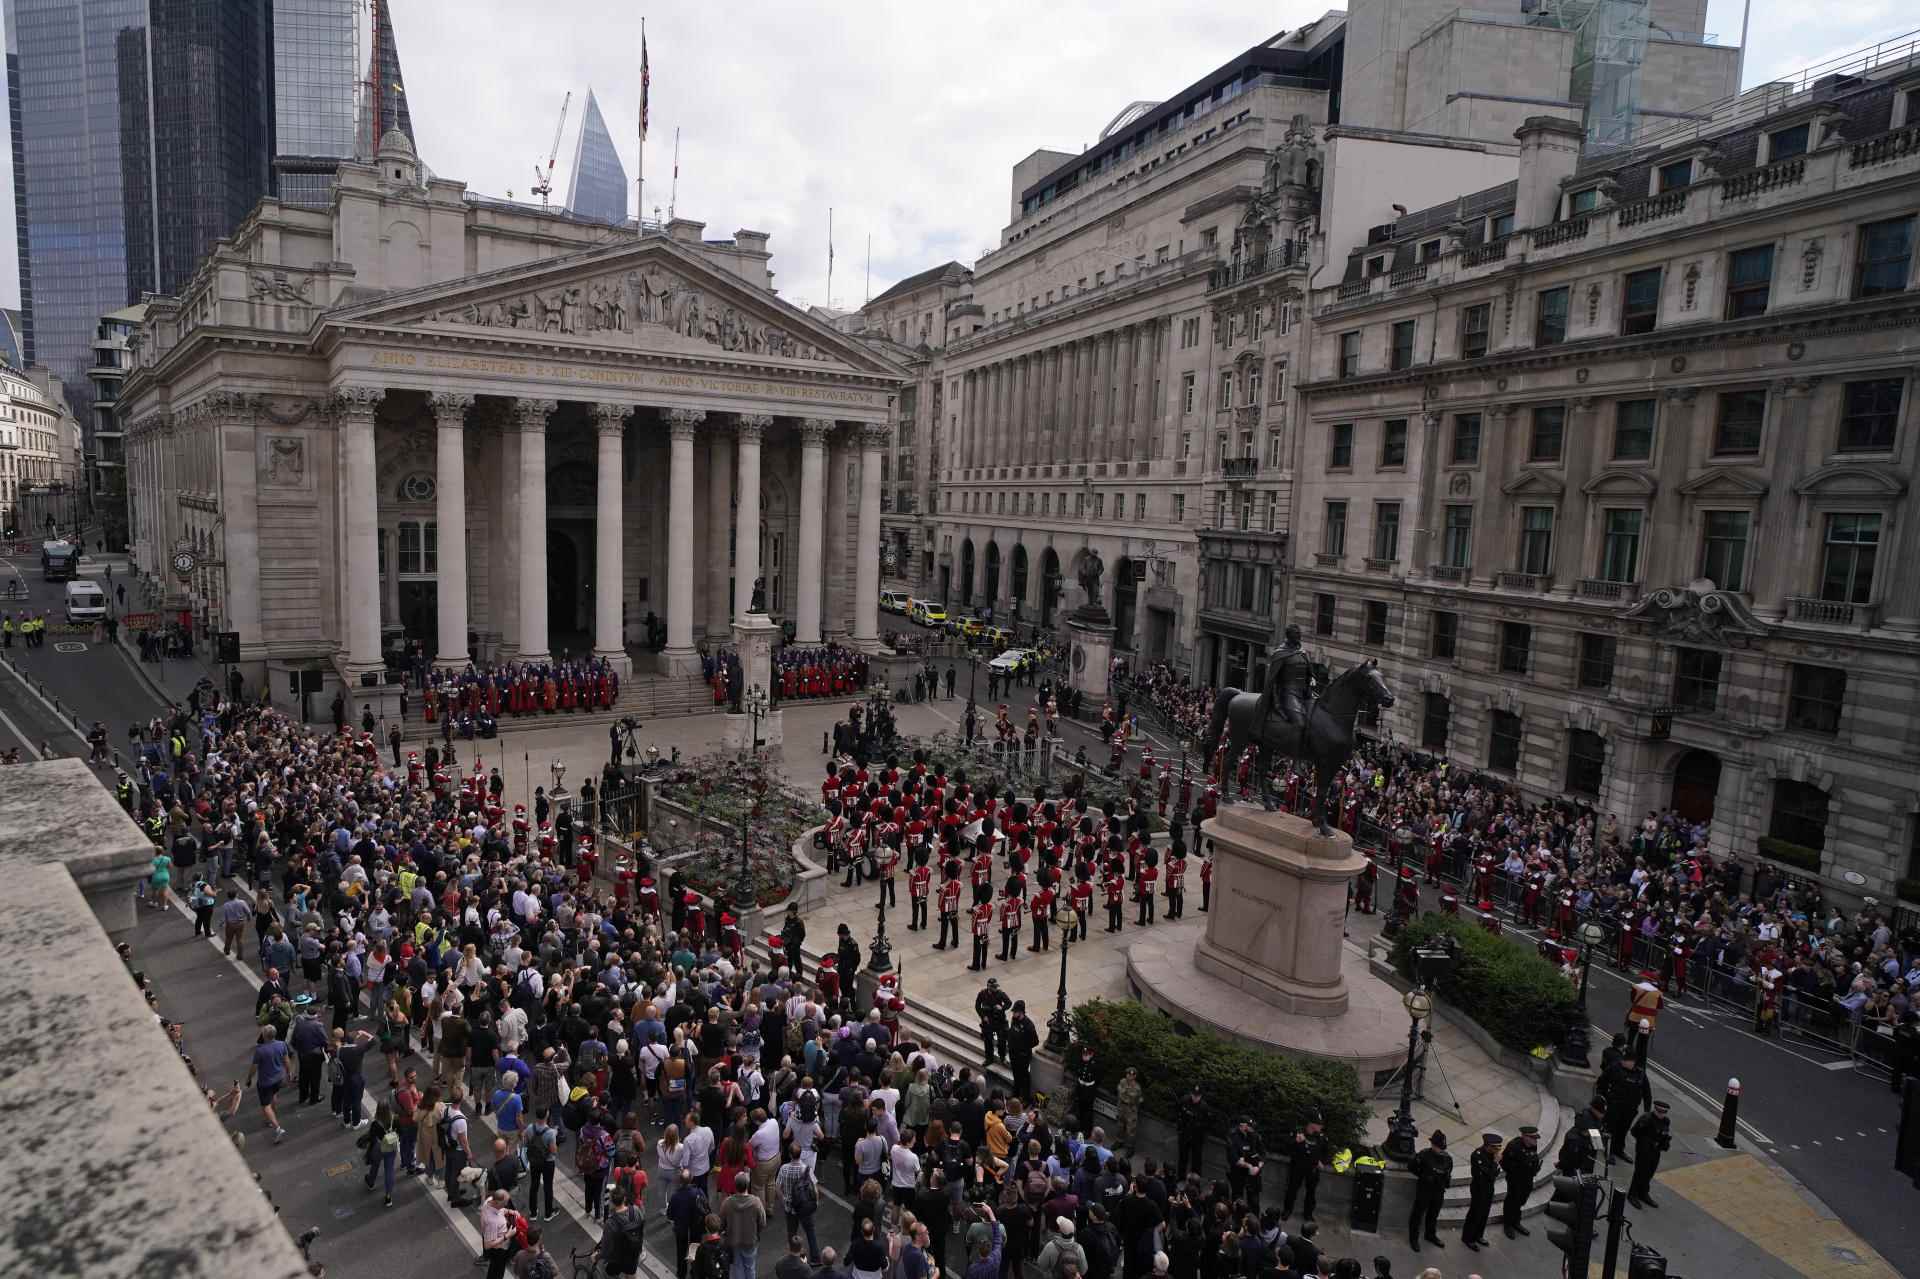 The proclamation ceremony outside the Royal Exchange in the City, London, on September 10, 2022.